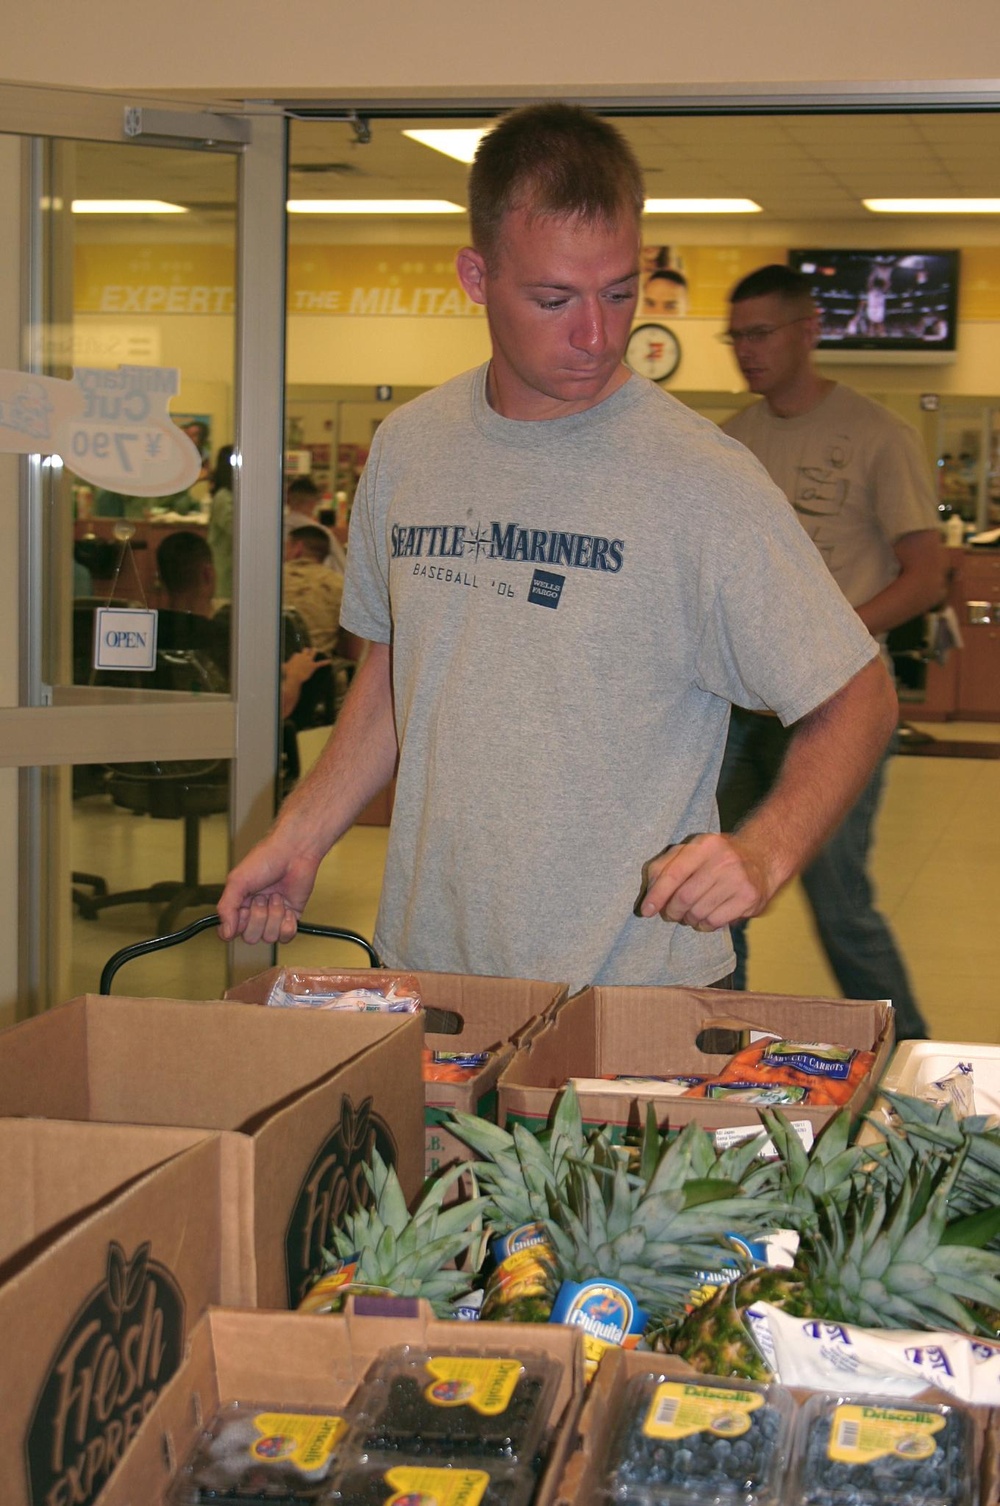 Commissary on Wheels saves time, money for Hansen-based troops